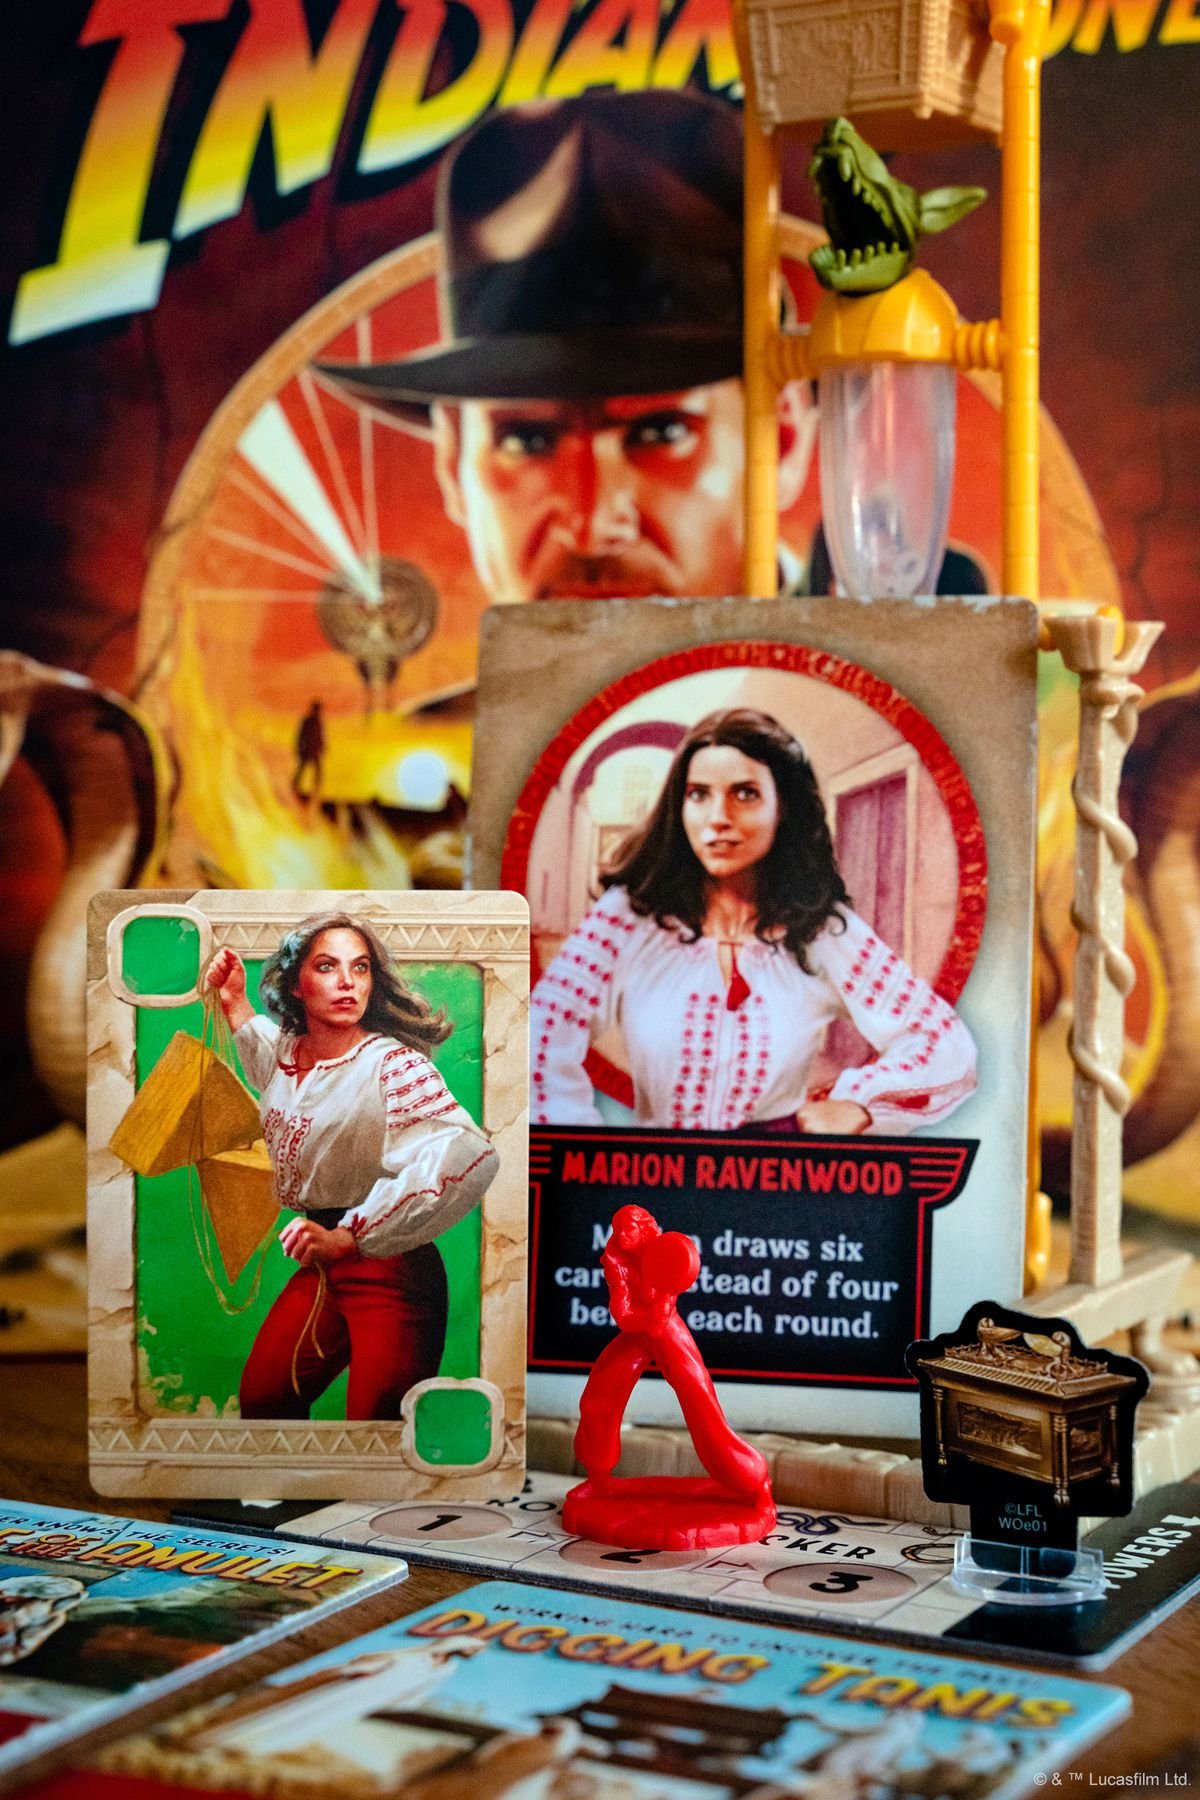 A card for Marion Ravenwood, and a red miniature. The image also shows a cardboard mover in the shape of 